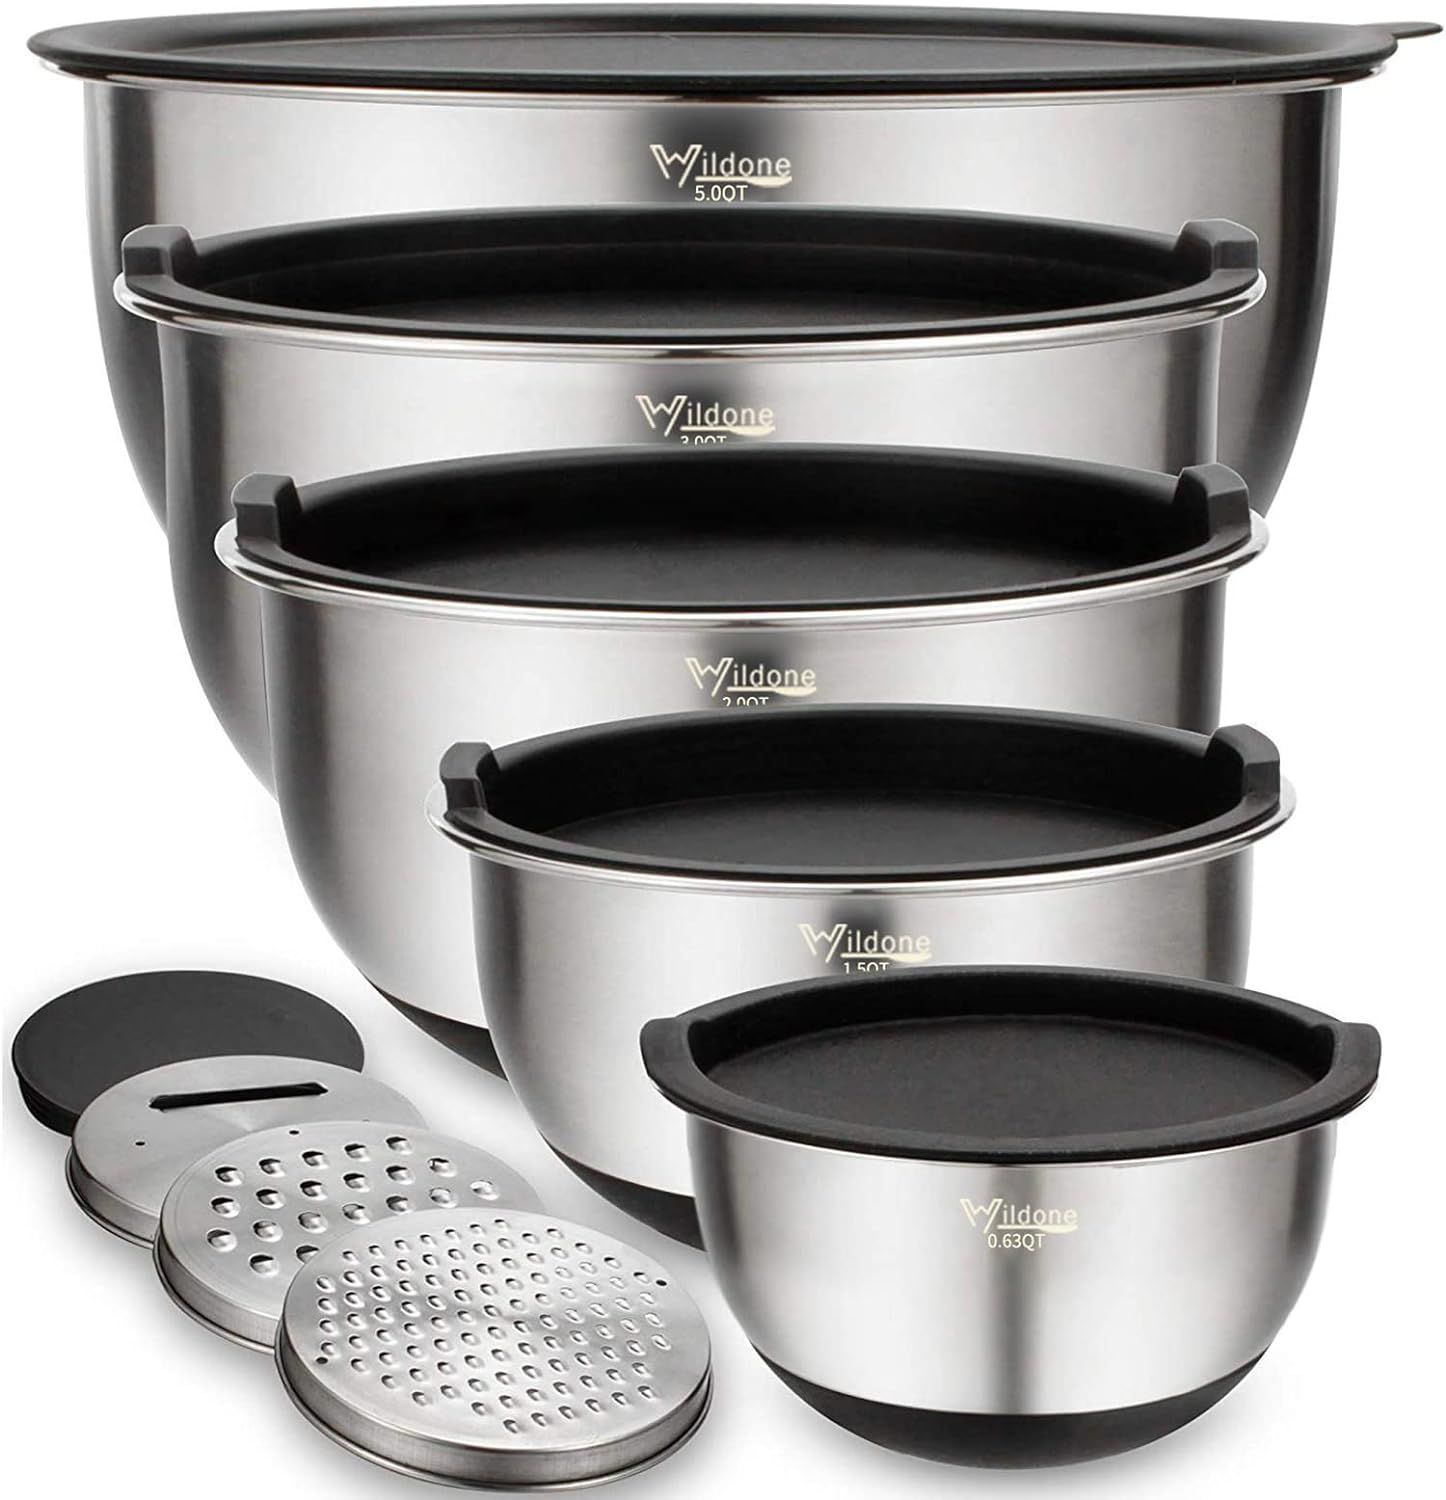 Wildone Mixing Bowls Set of 5, Stainless Steel Nesting Bowls with Lids, 3 Grater Attachments, Mea... | Amazon (US)